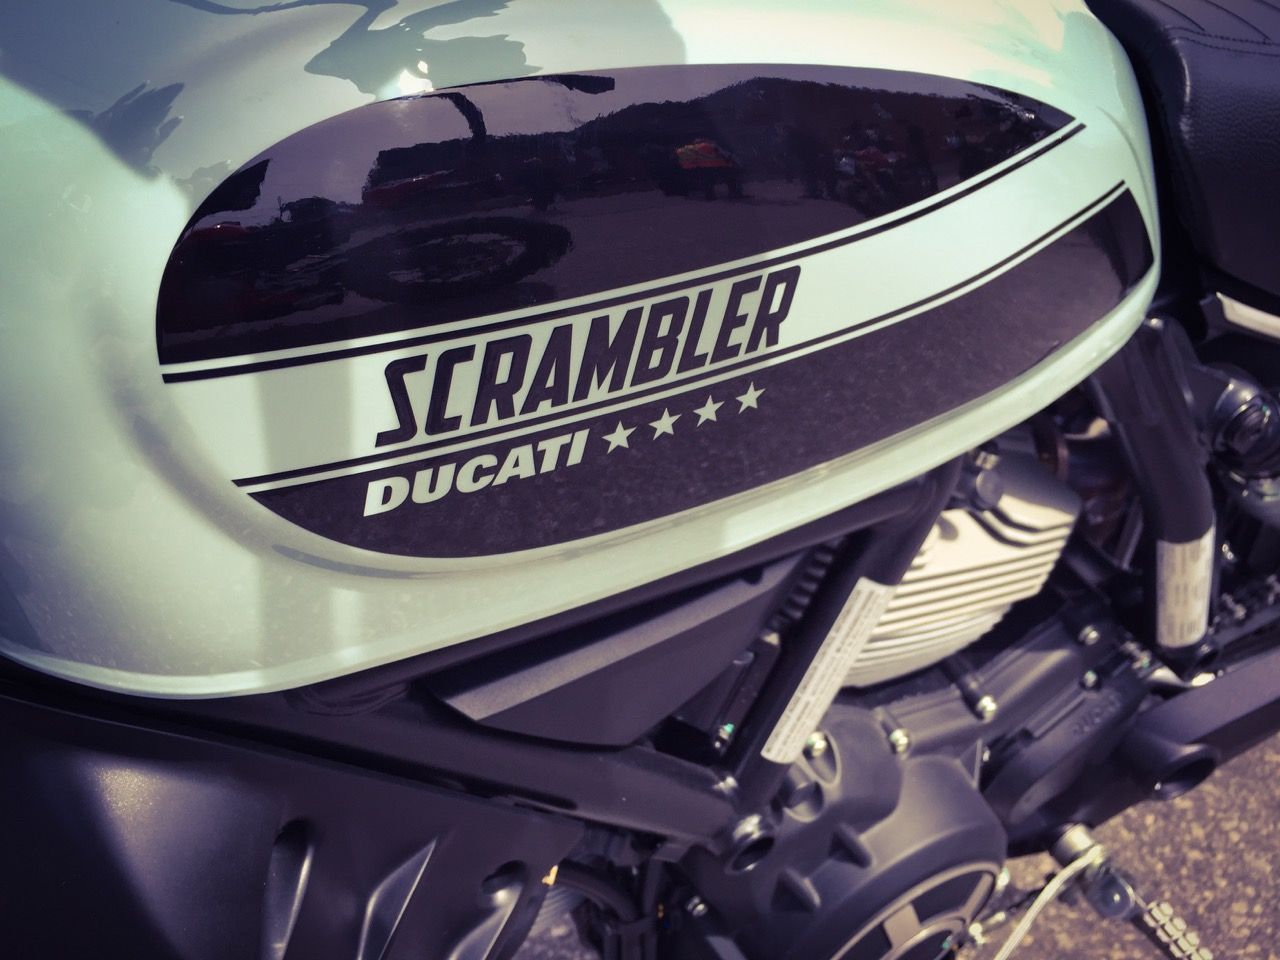 Ducati Scrambler Sixty2: Ideal day-tripper at the cottage or the beach.